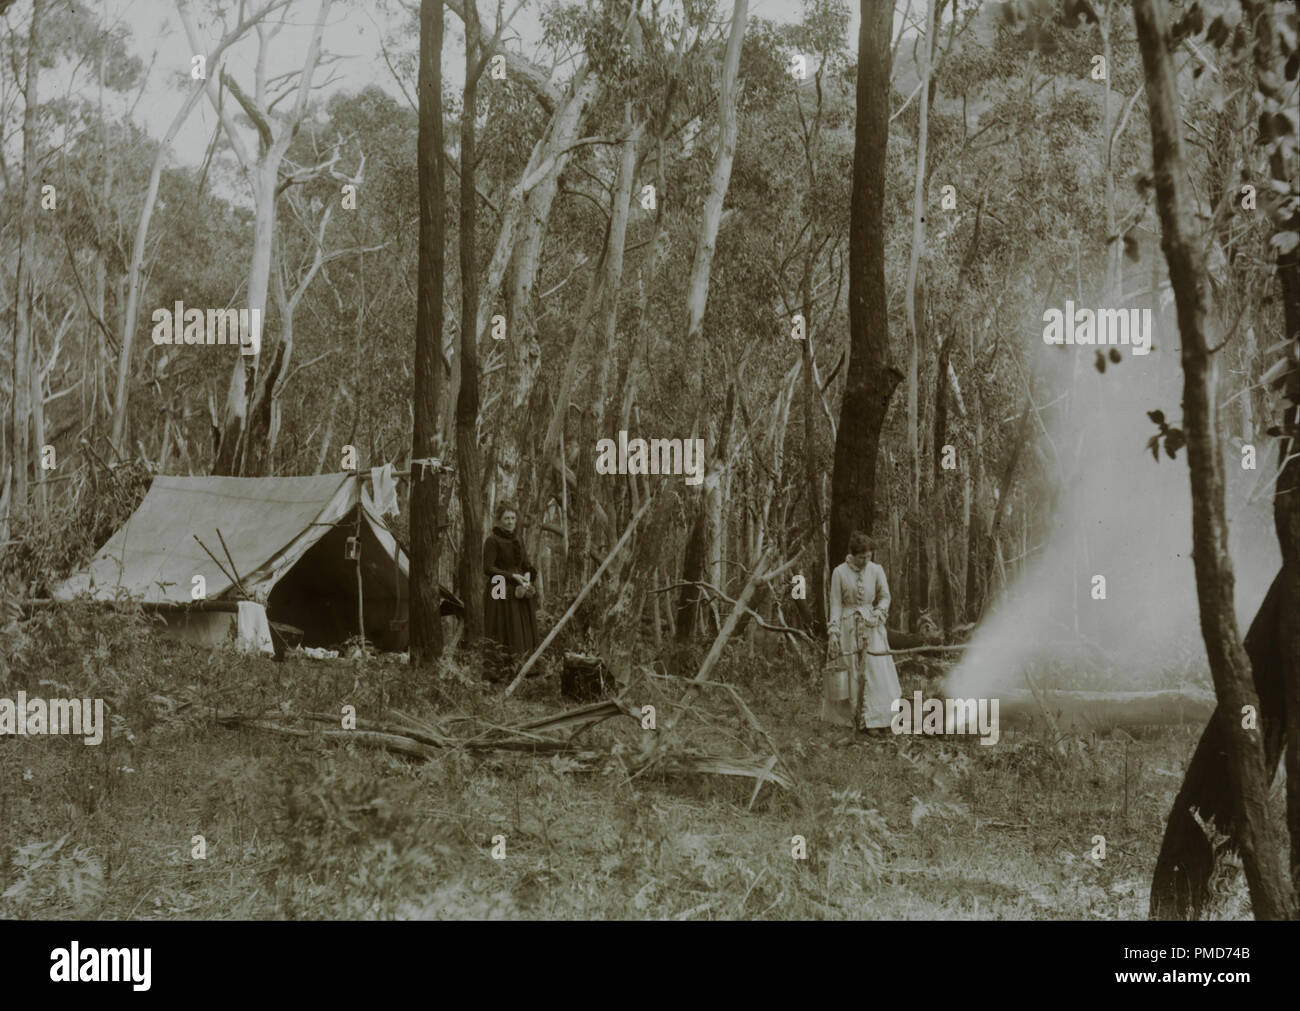 https://c8.alamy.com/comp/PMD74B/pioneer-women-in-land-clearing-dateperiod-1890-image-photograph-photograph-author-archibald-james-campbell-PMD74B.jpg